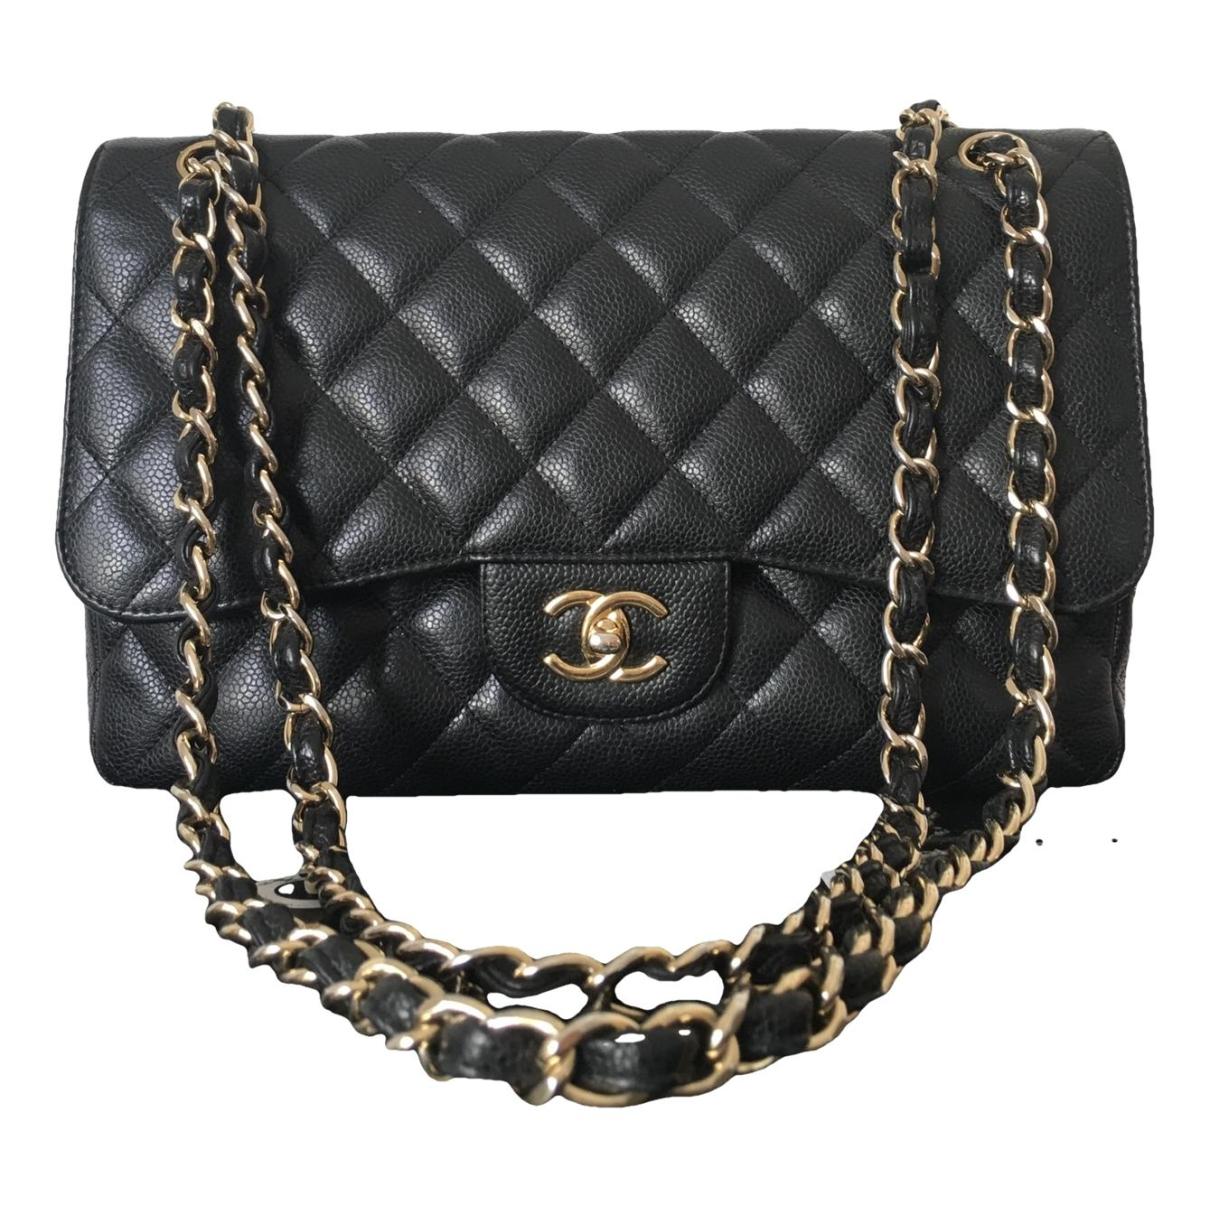 Timeless/classique leather crossbody bag Chanel Black in Leather - 31288108